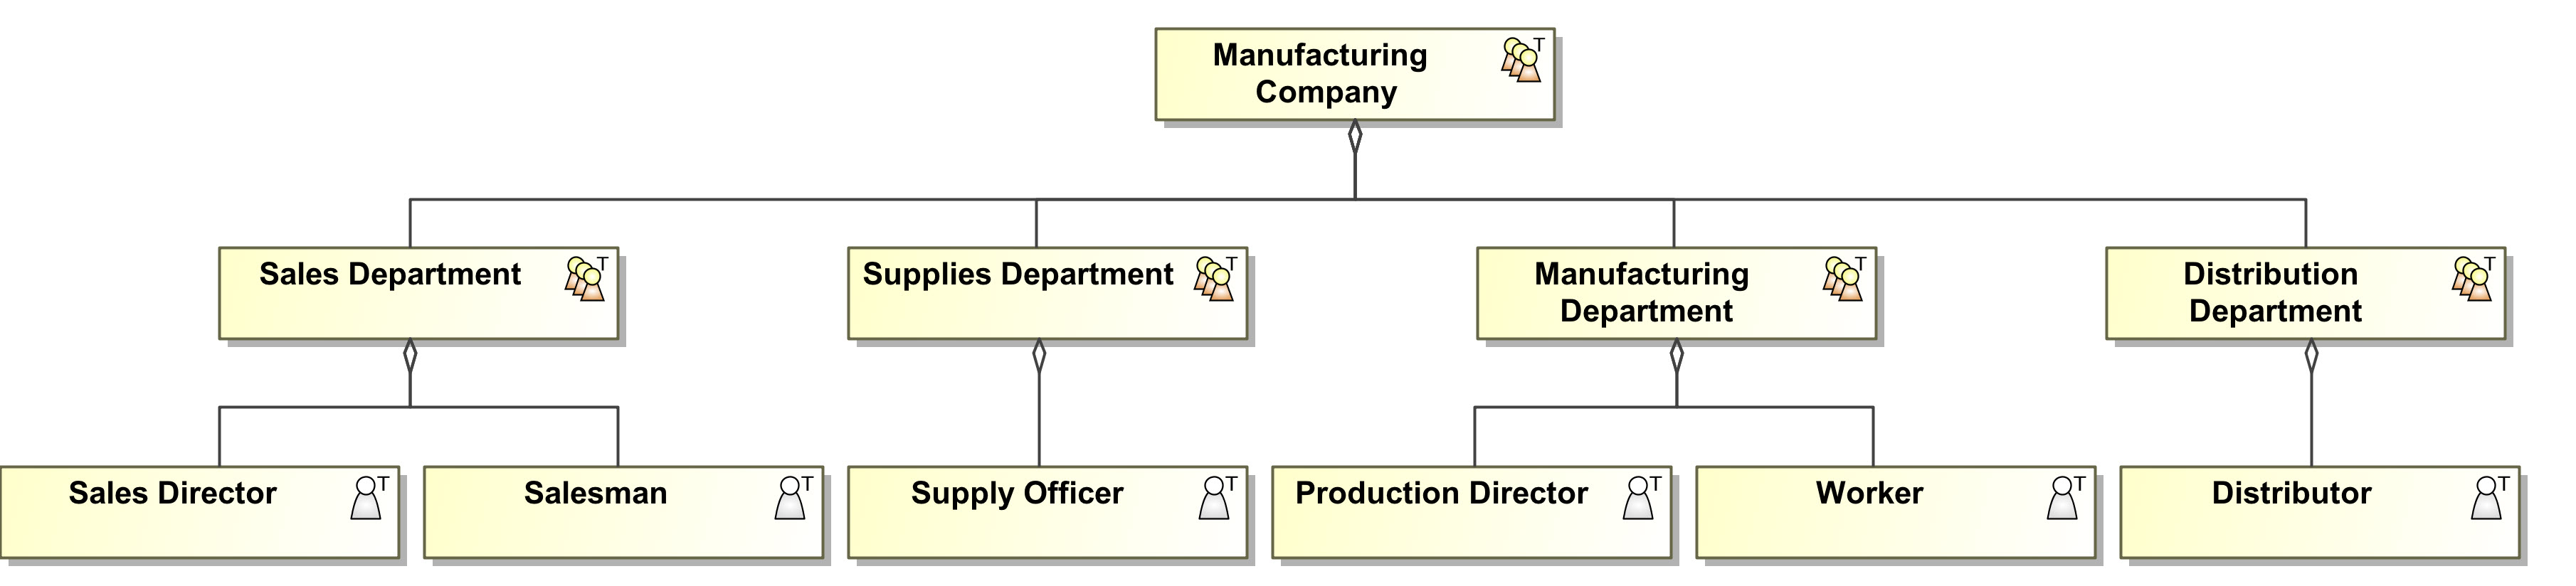 Figure 2. Organization Structure Diagram showing departments and job roles inside them